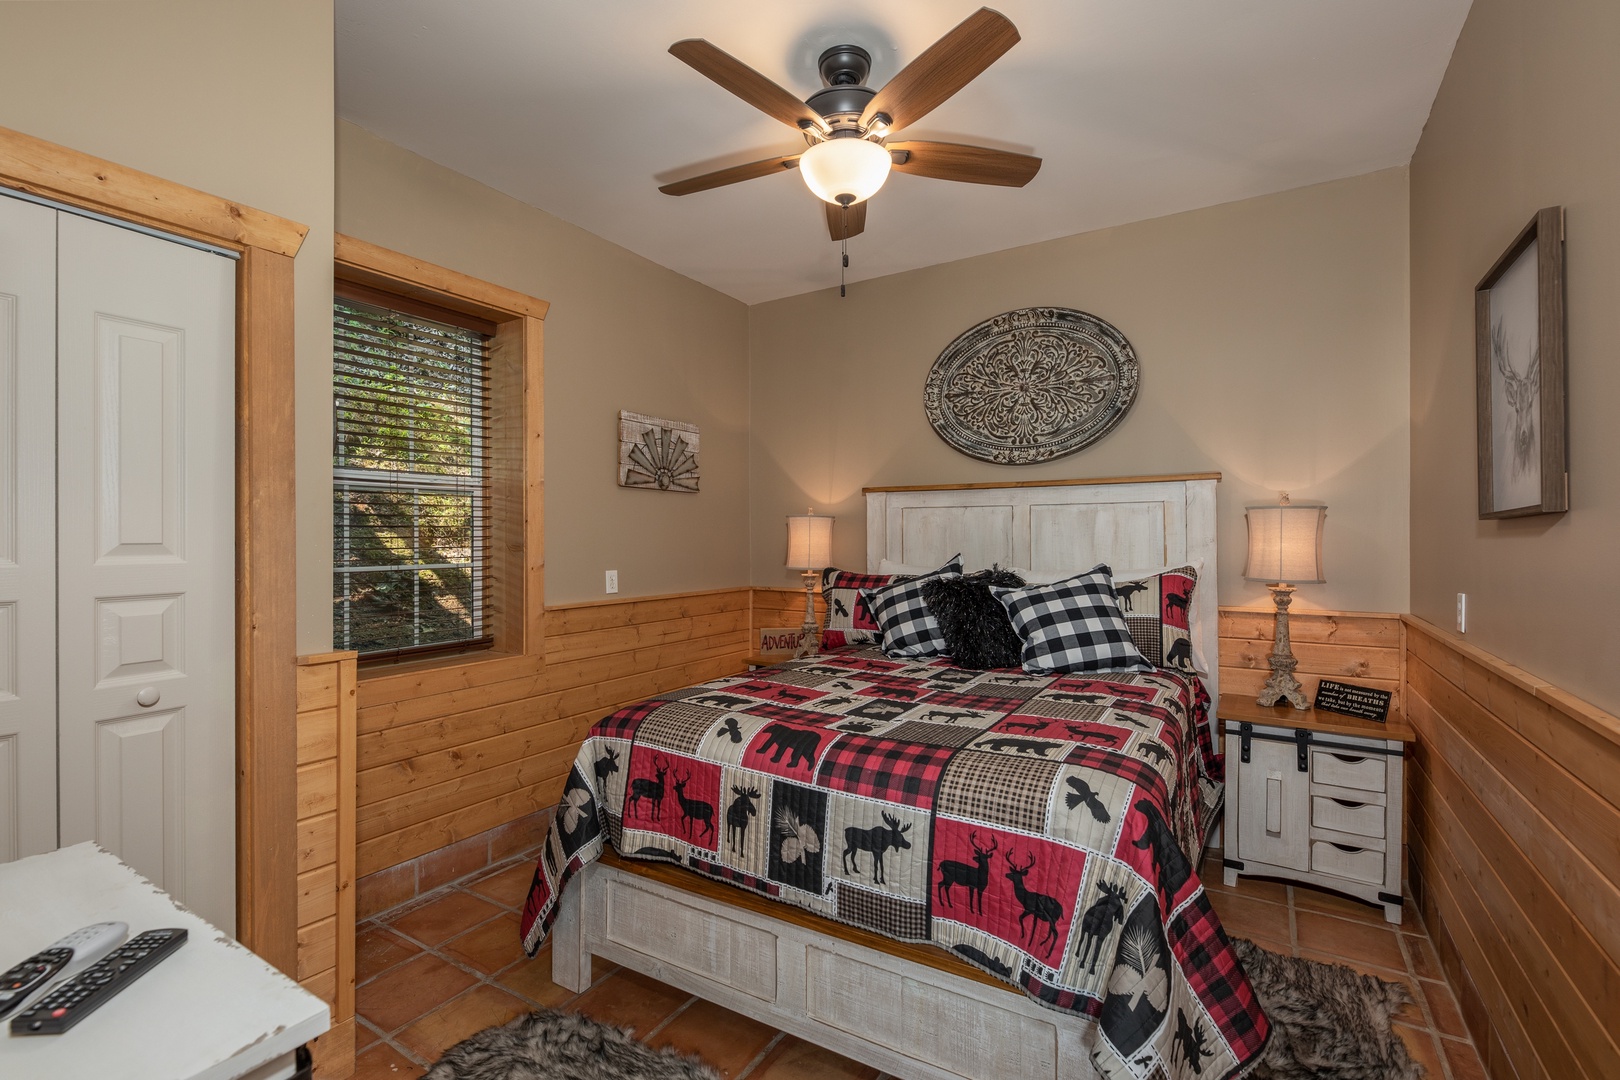 Bedroom with rustic furniture at Hawk's Heart Lodge, a 3 bedroom cabin rental located in Pigeon Forge